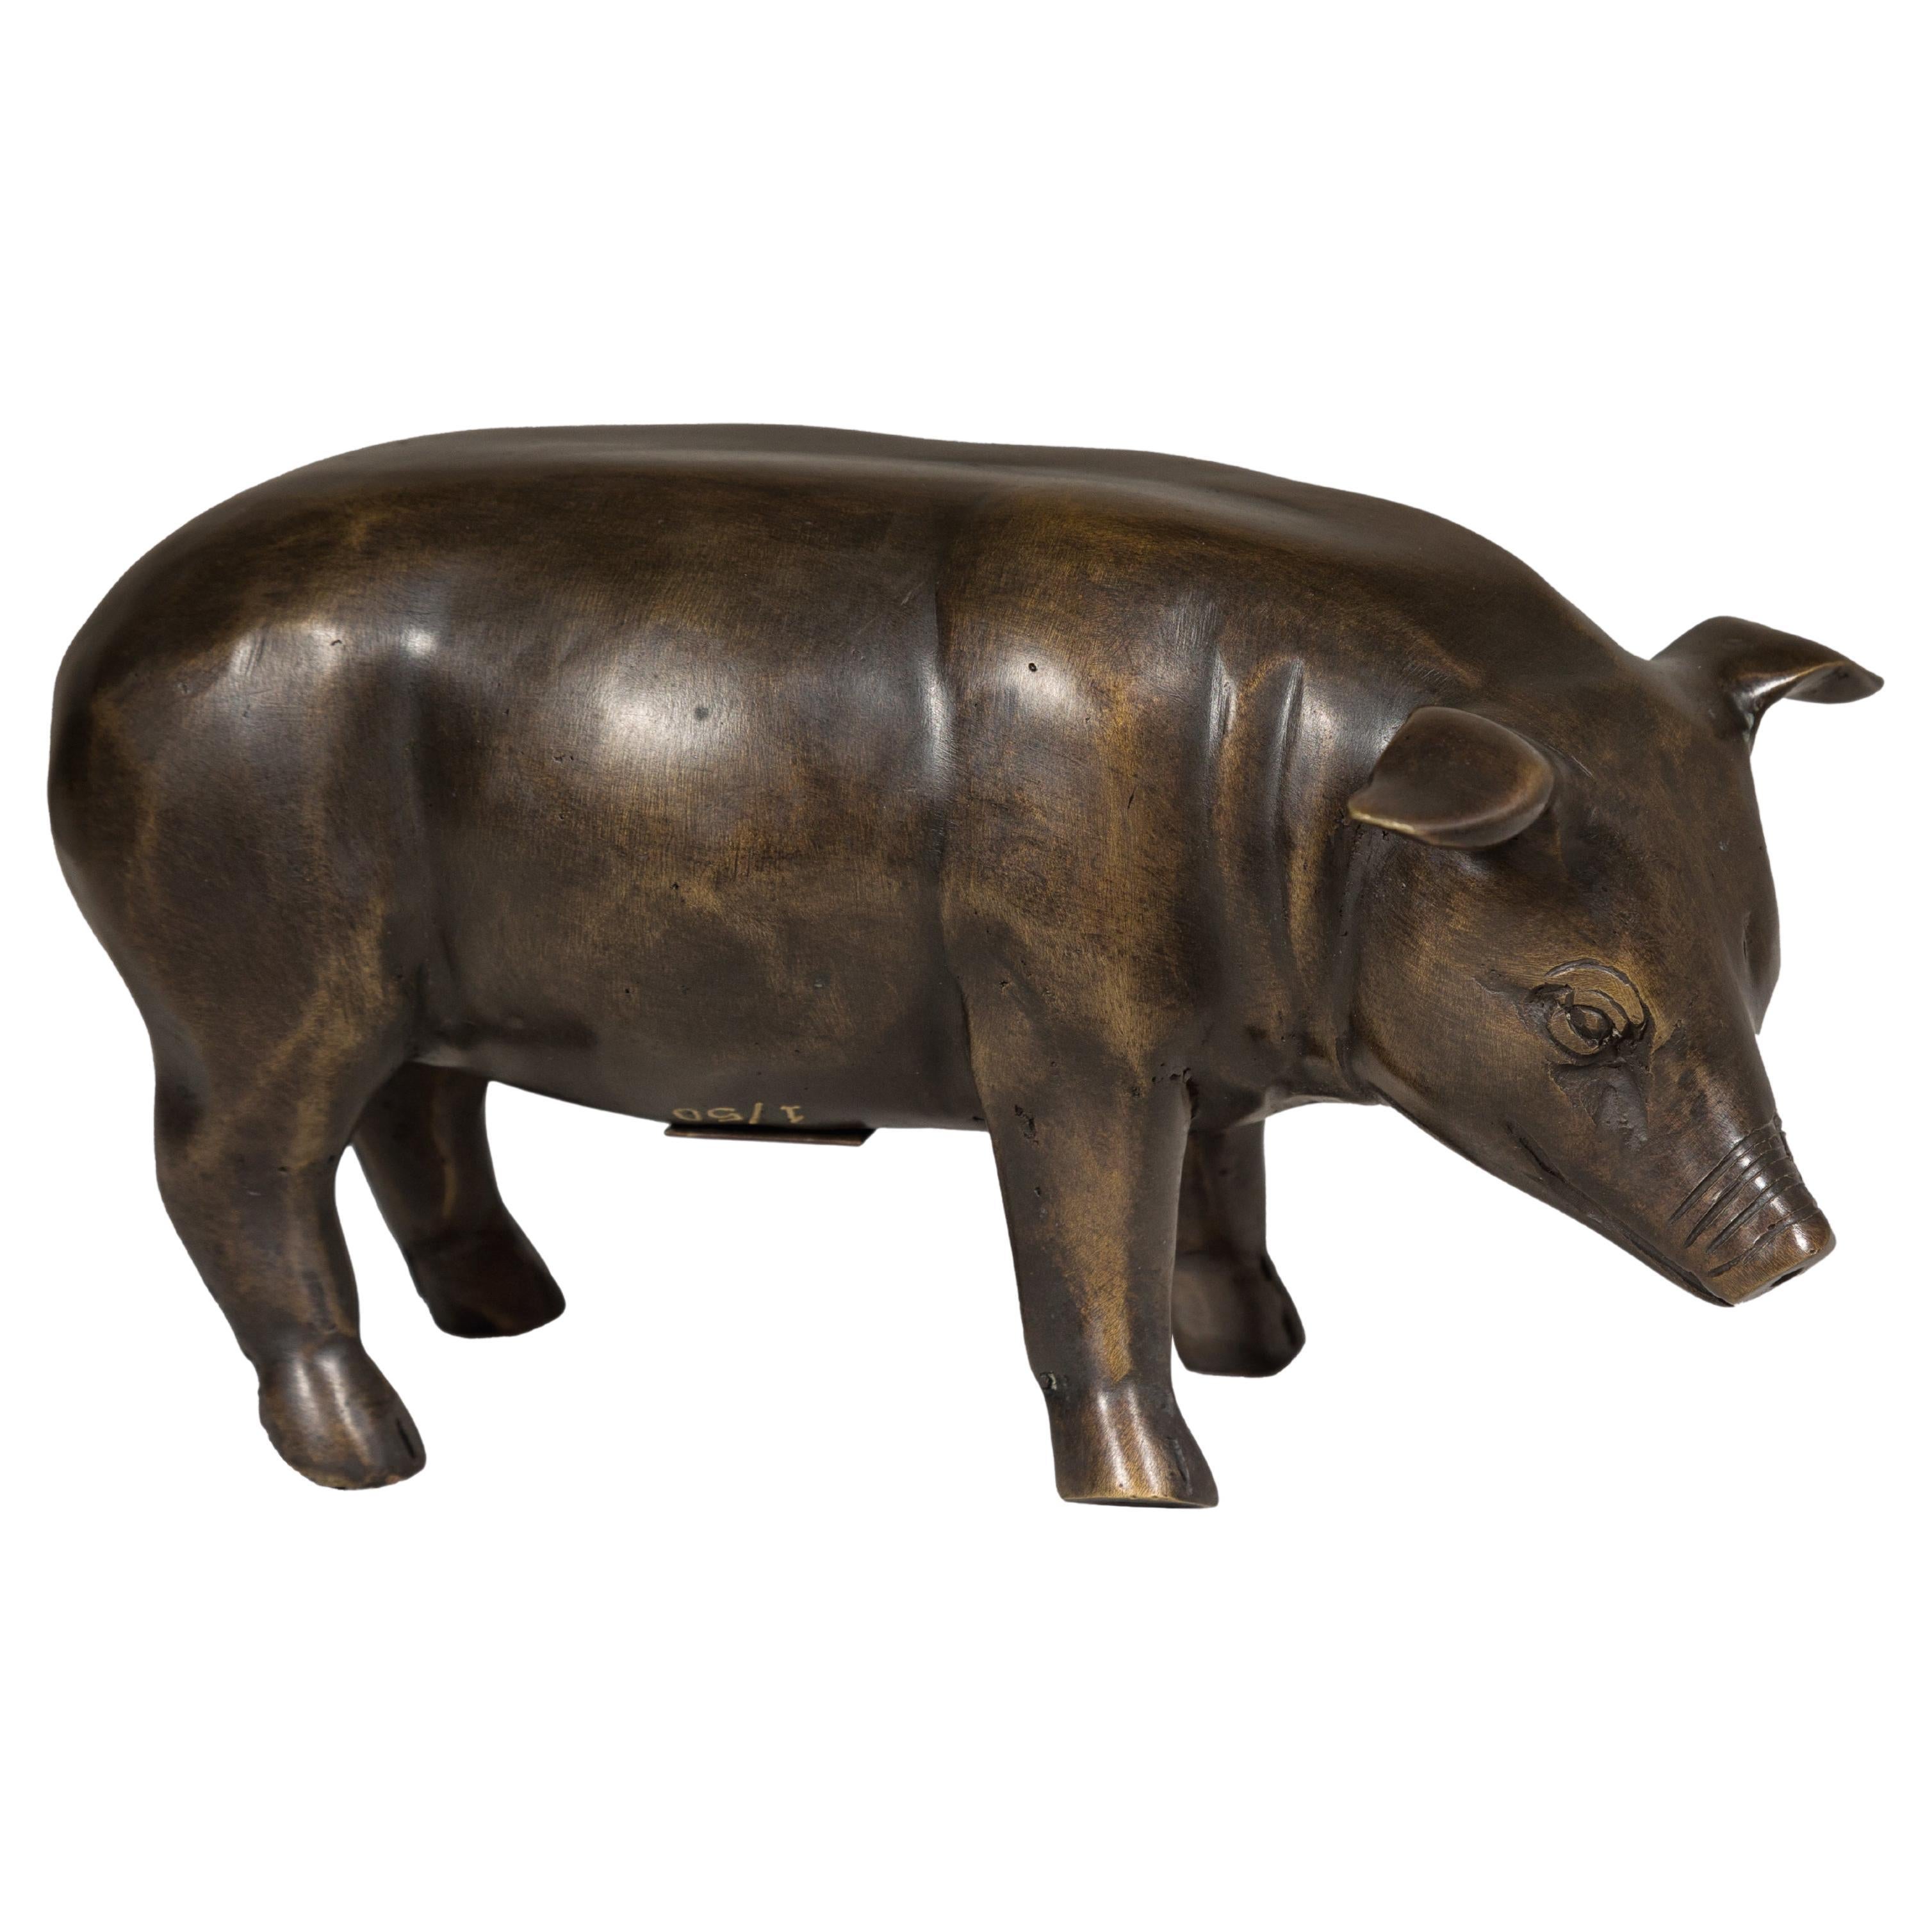 Limited Edition Bronze Pig Statuette from the Randolph Rose Collection For Sale